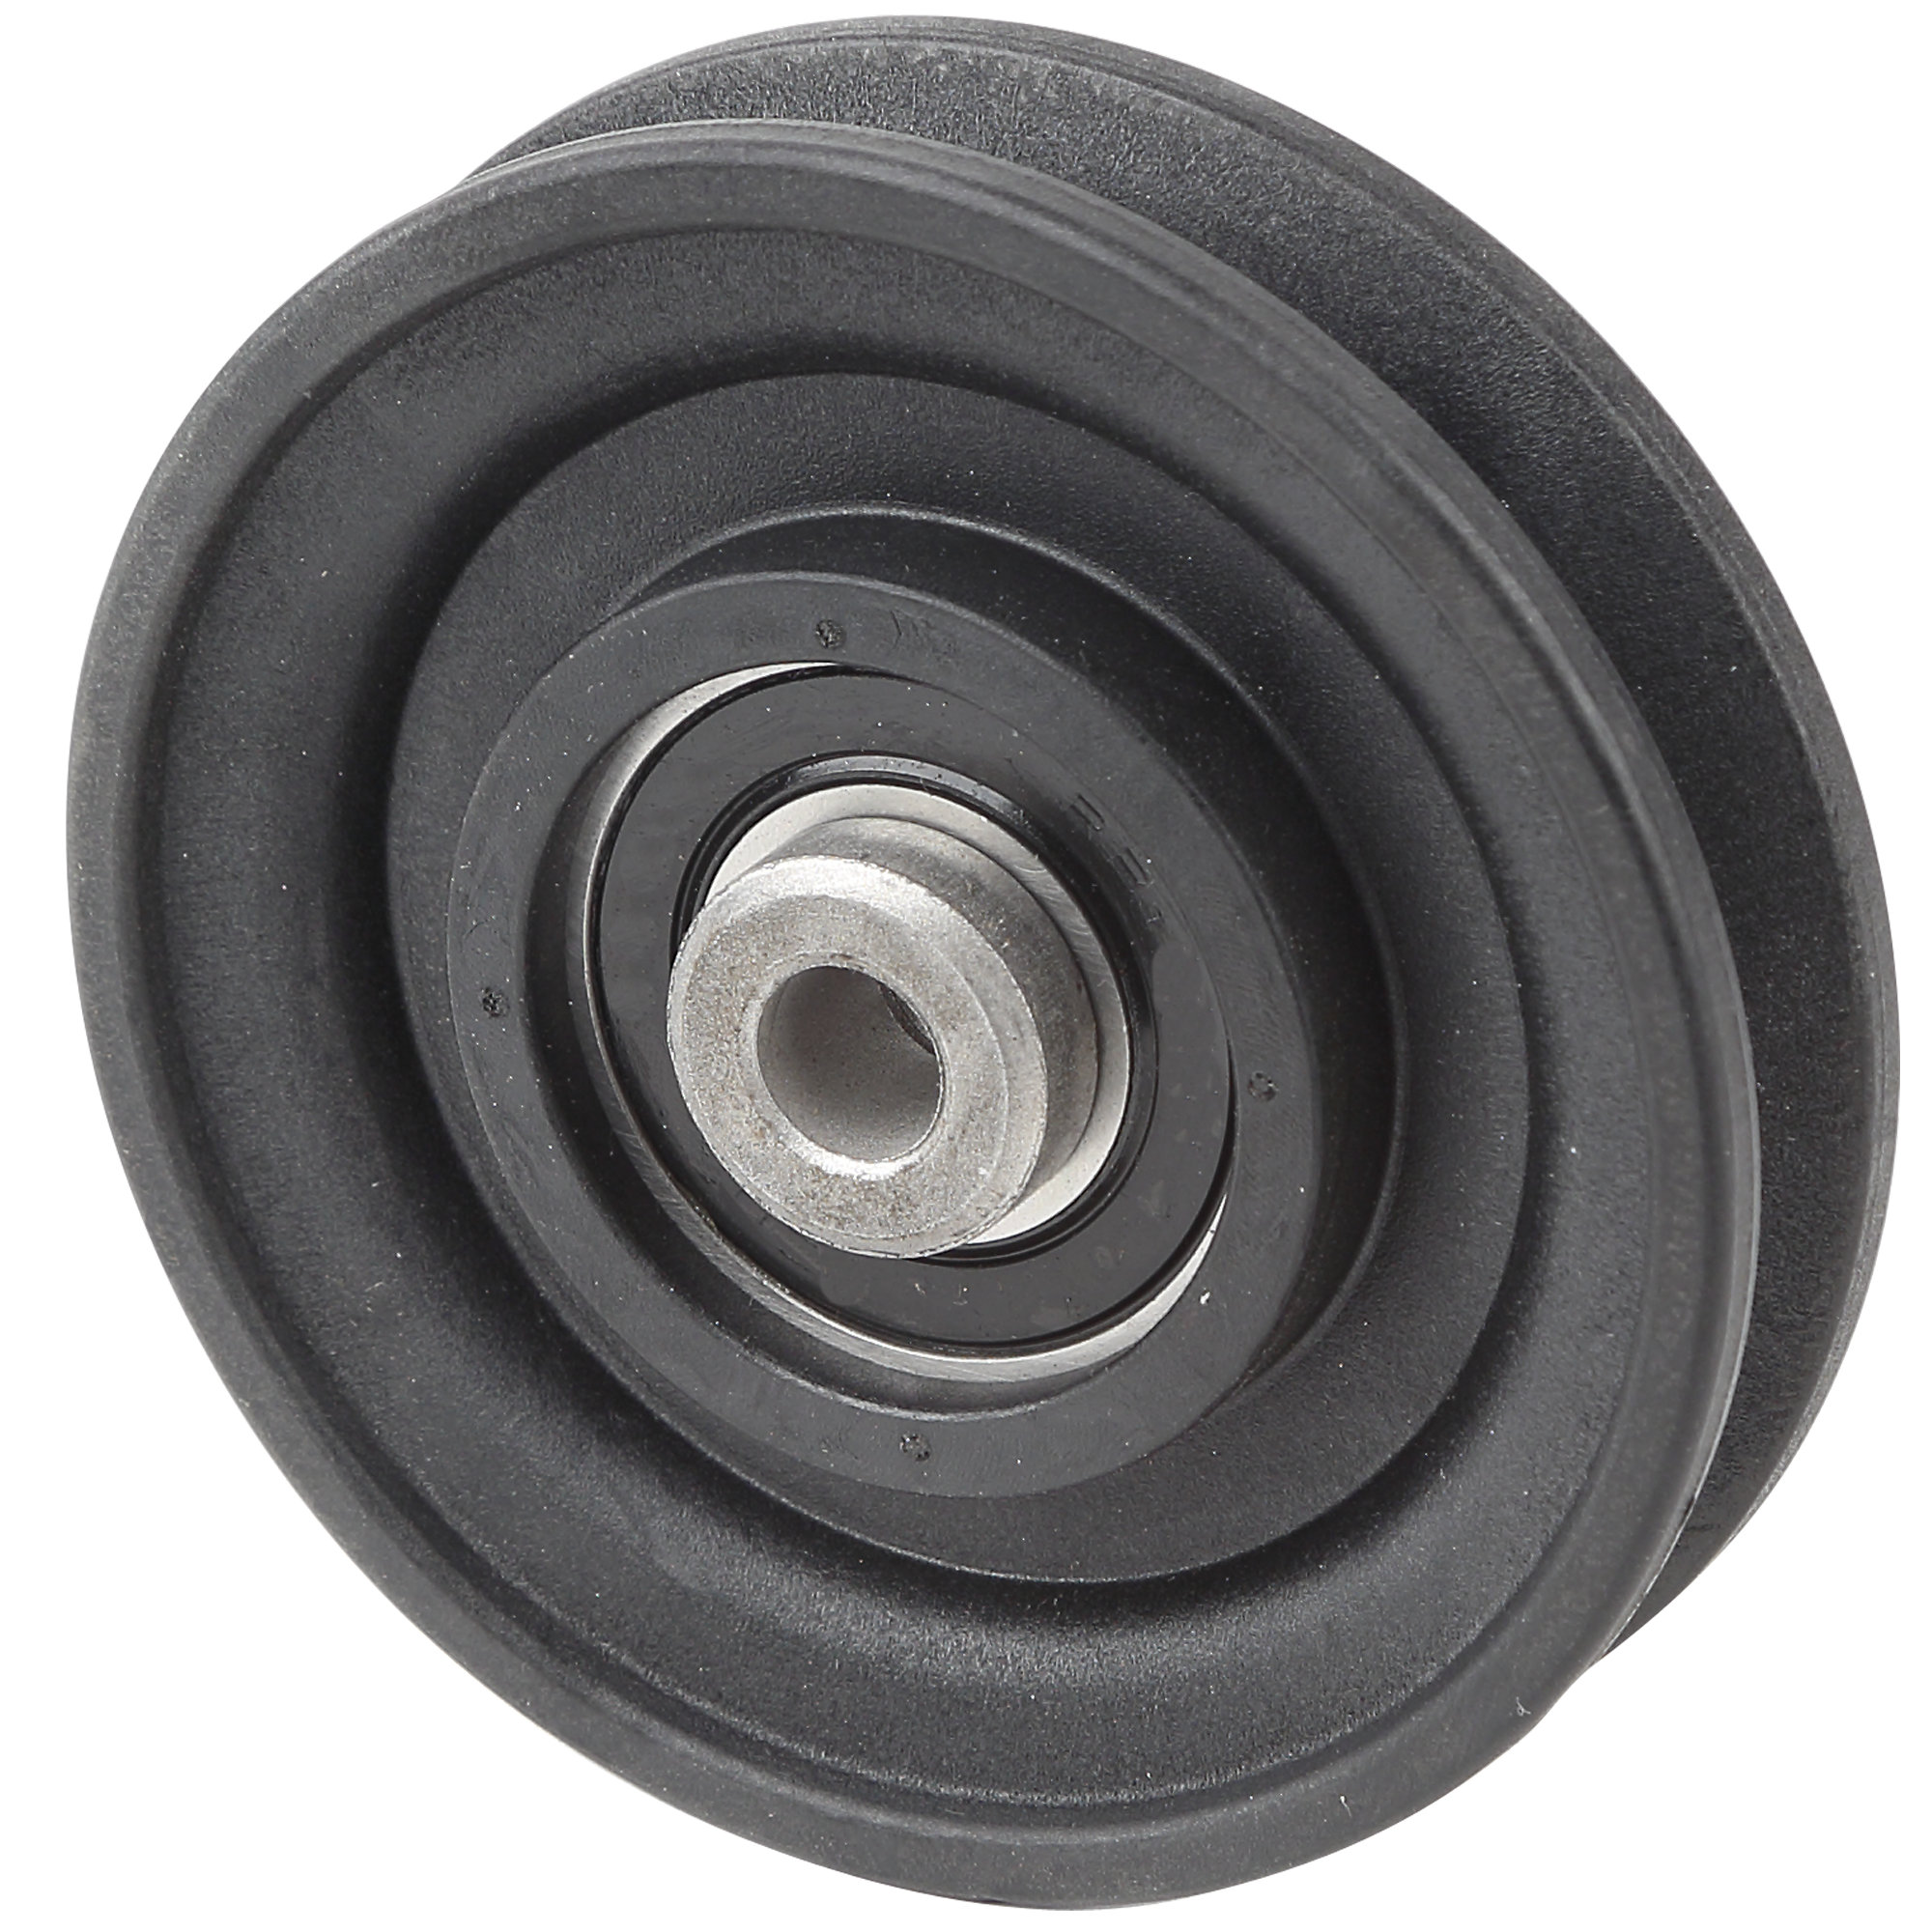 3 1/2" Pulley Freemotion Fitness GZ1003-09